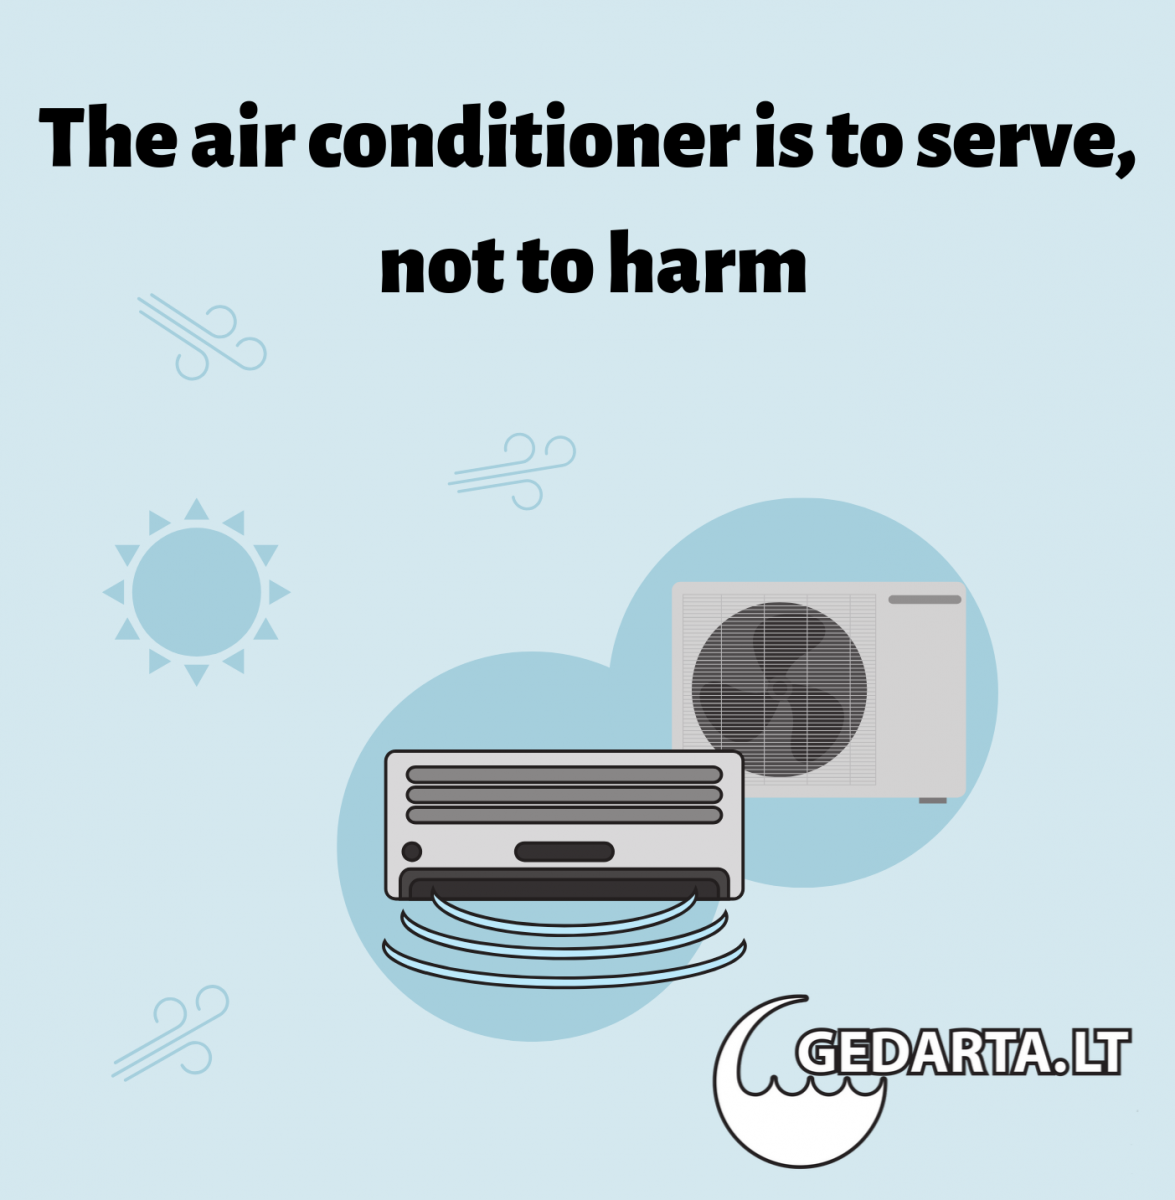 The air conditioner is to serve, not to harm